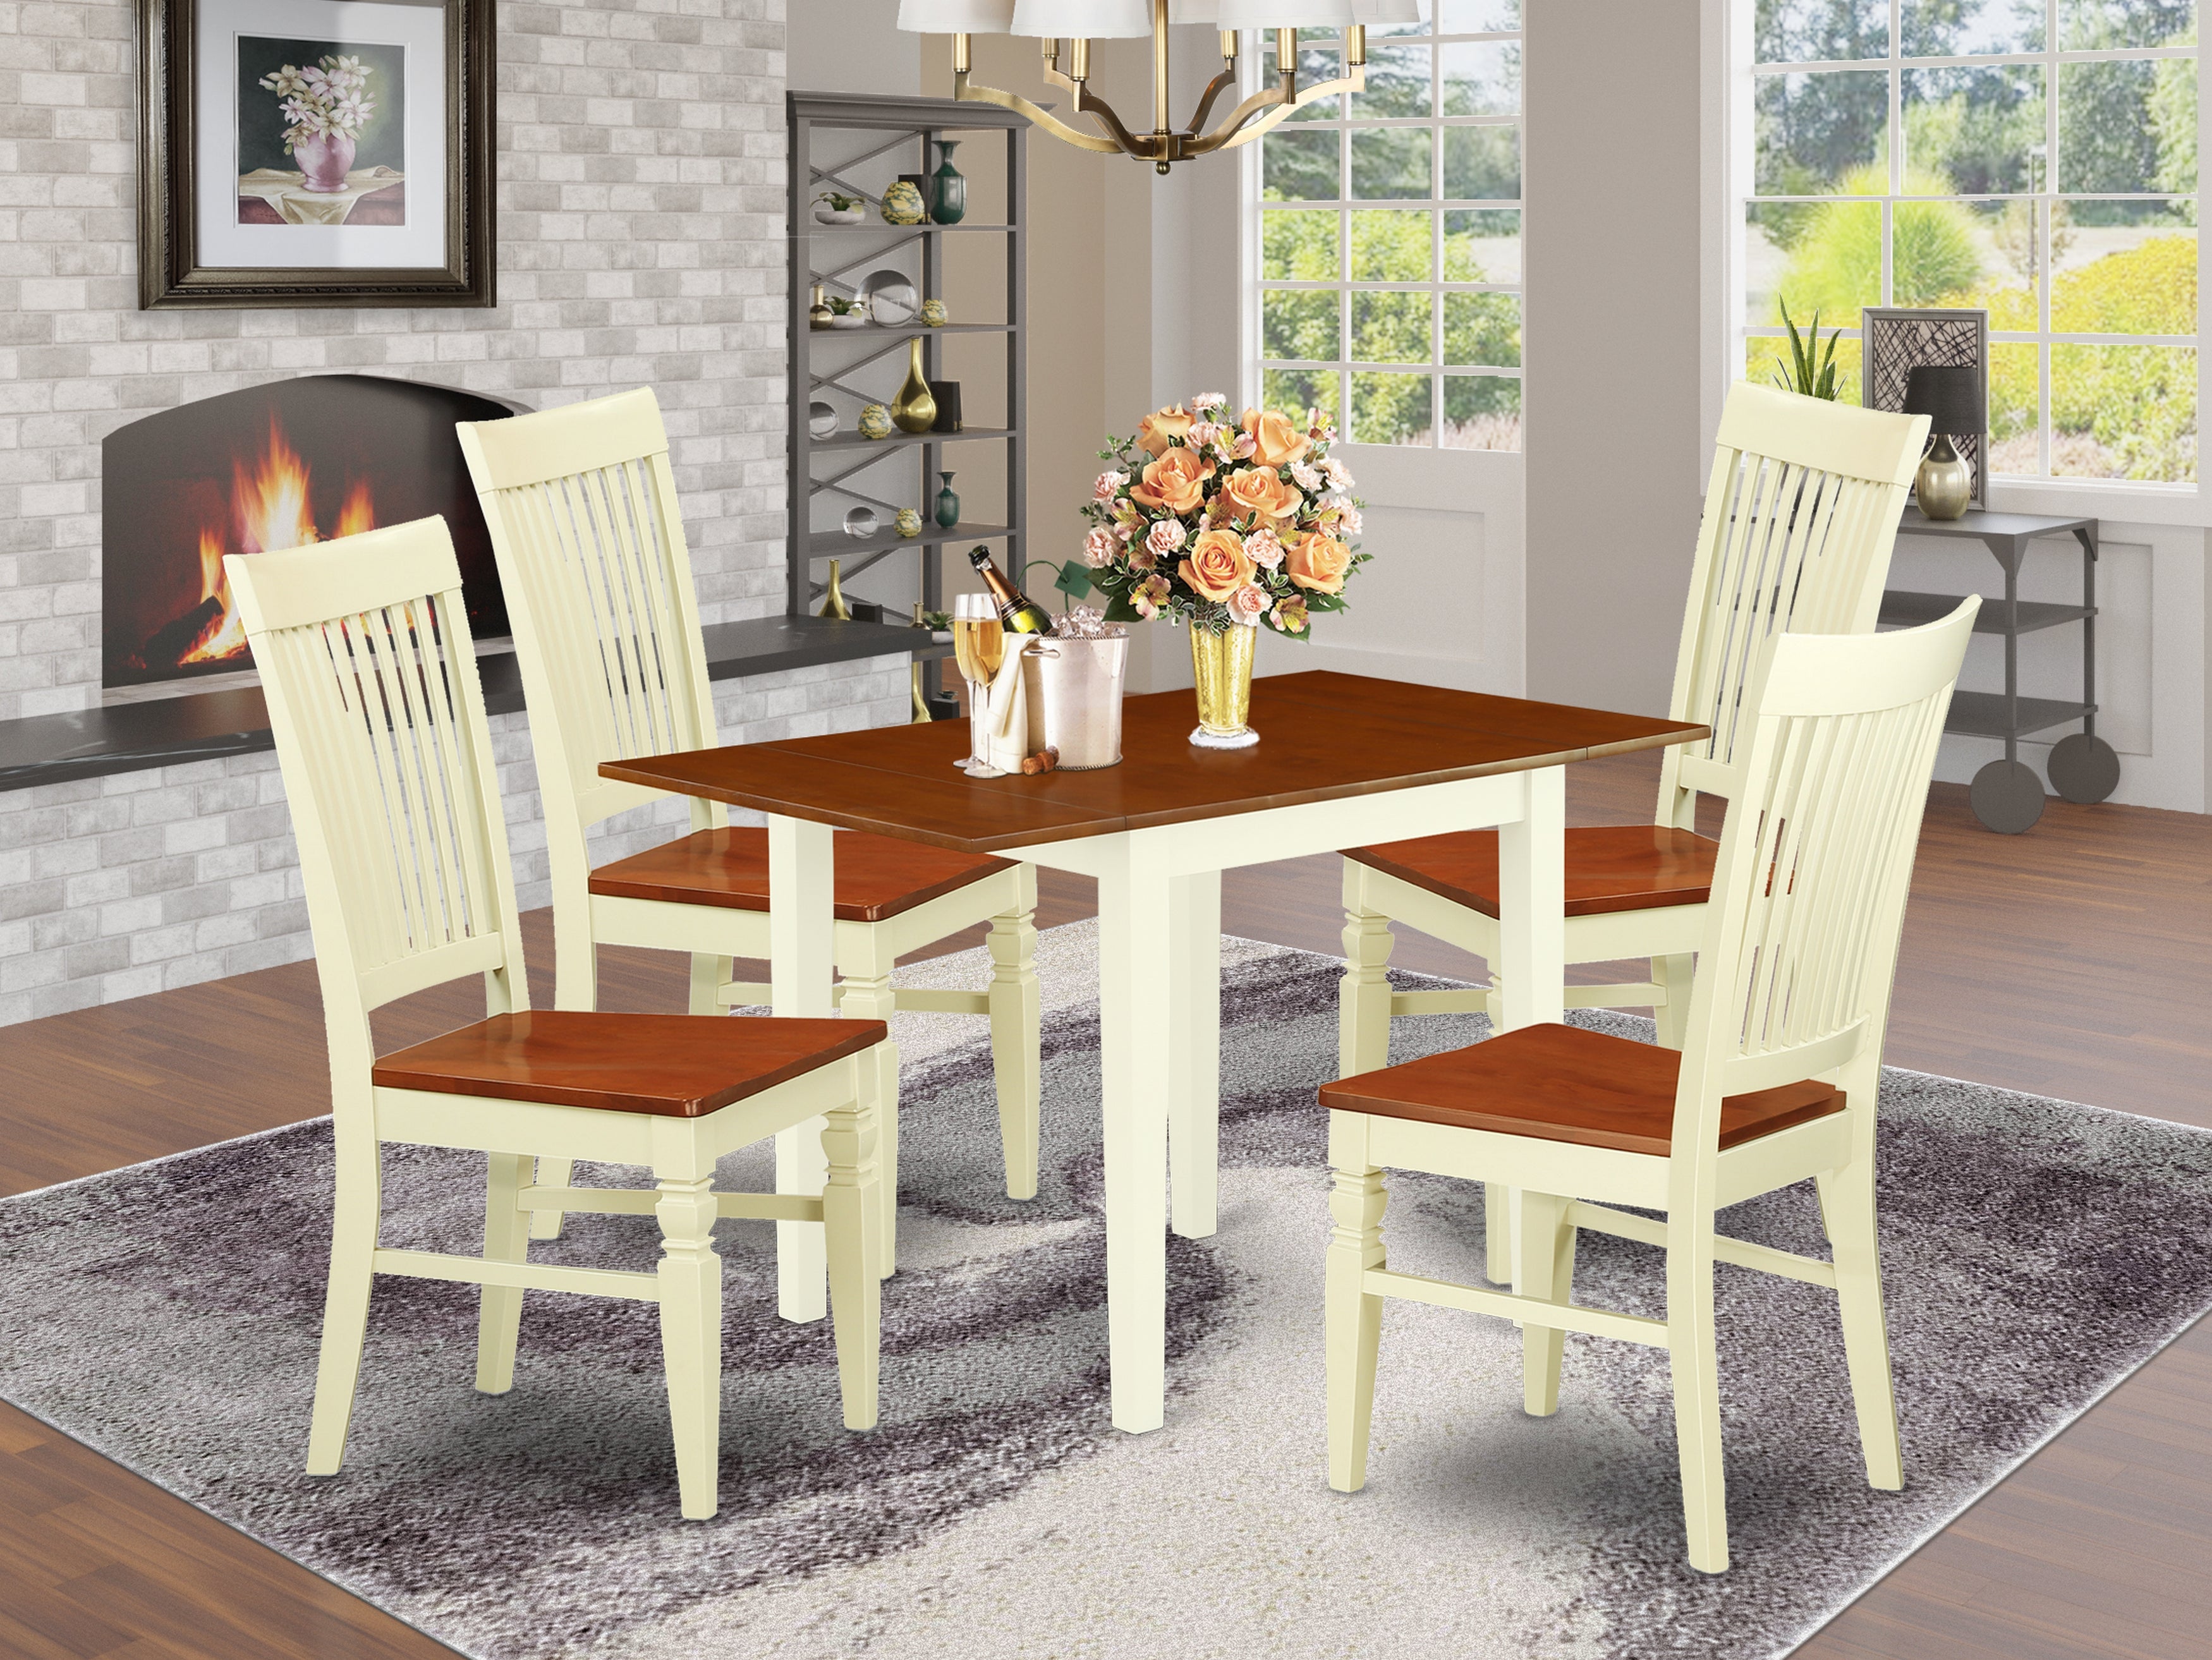 East West Furniture NDWE5-WHI-W, 5Pc Dinette Set for Small Spaces Includes a Wood Dining Table and 4 Wooden Dining Chairs with Solid Wood Seat and Slat Back, Buttermilk and Cherry Finish